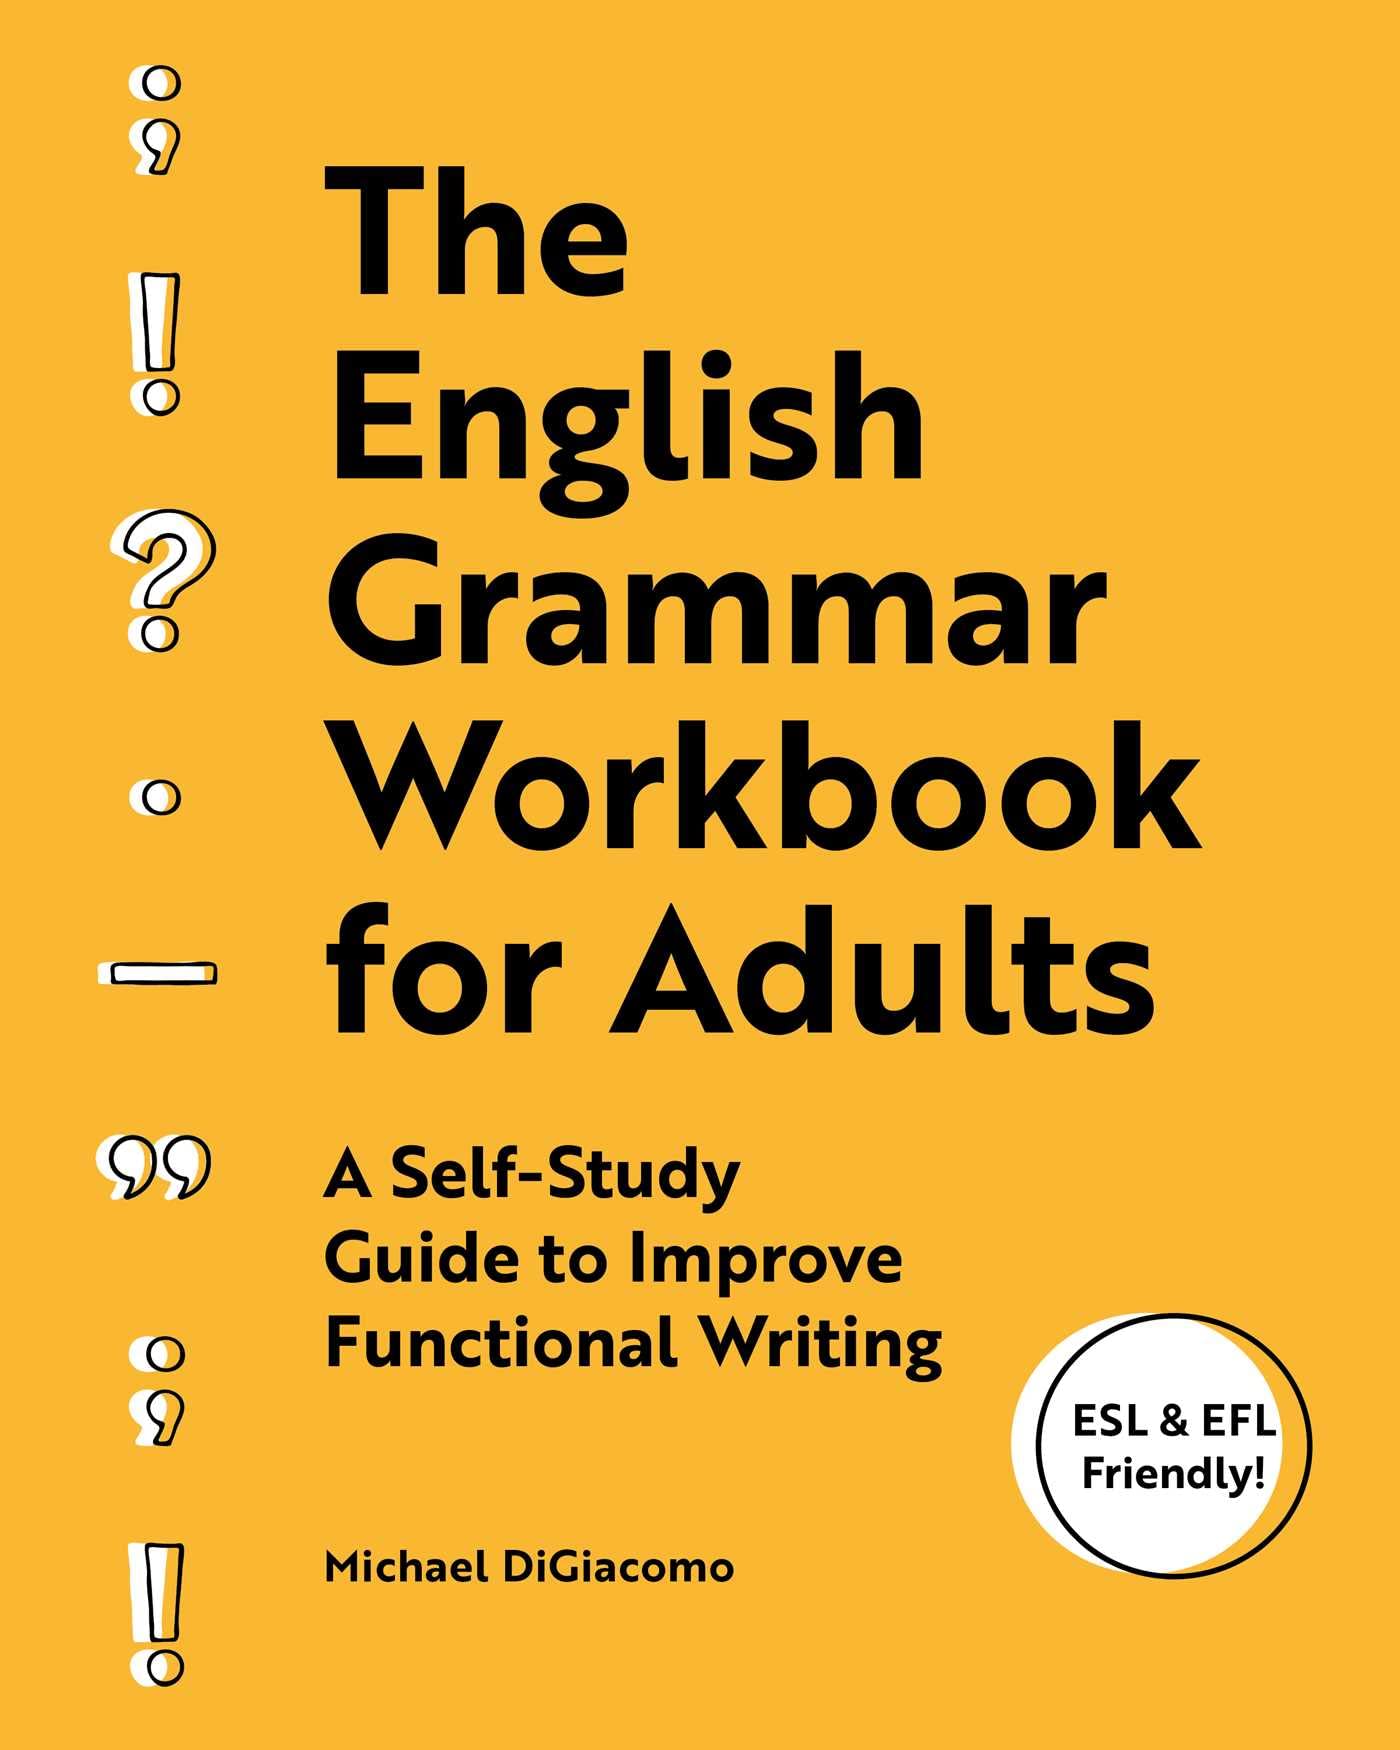 The English Grammar Workbook for Adults: A Self-Study Guide to Improve Functional Writing by Digiacomo, Michael